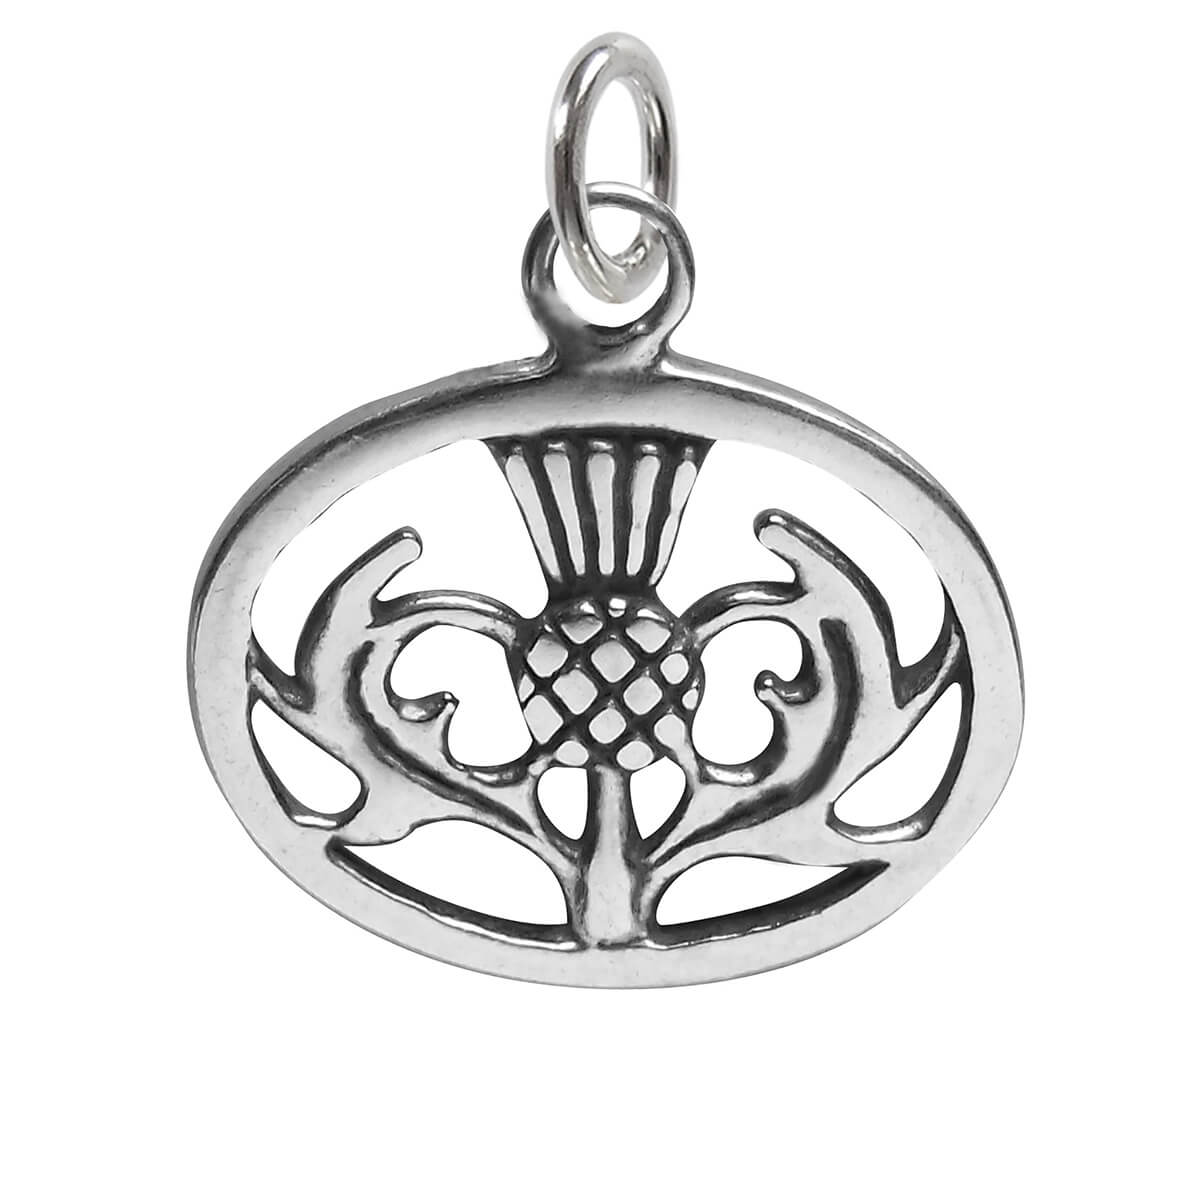 Scottish Thistle in Oval Charm Sterling Silver 925 Pendant